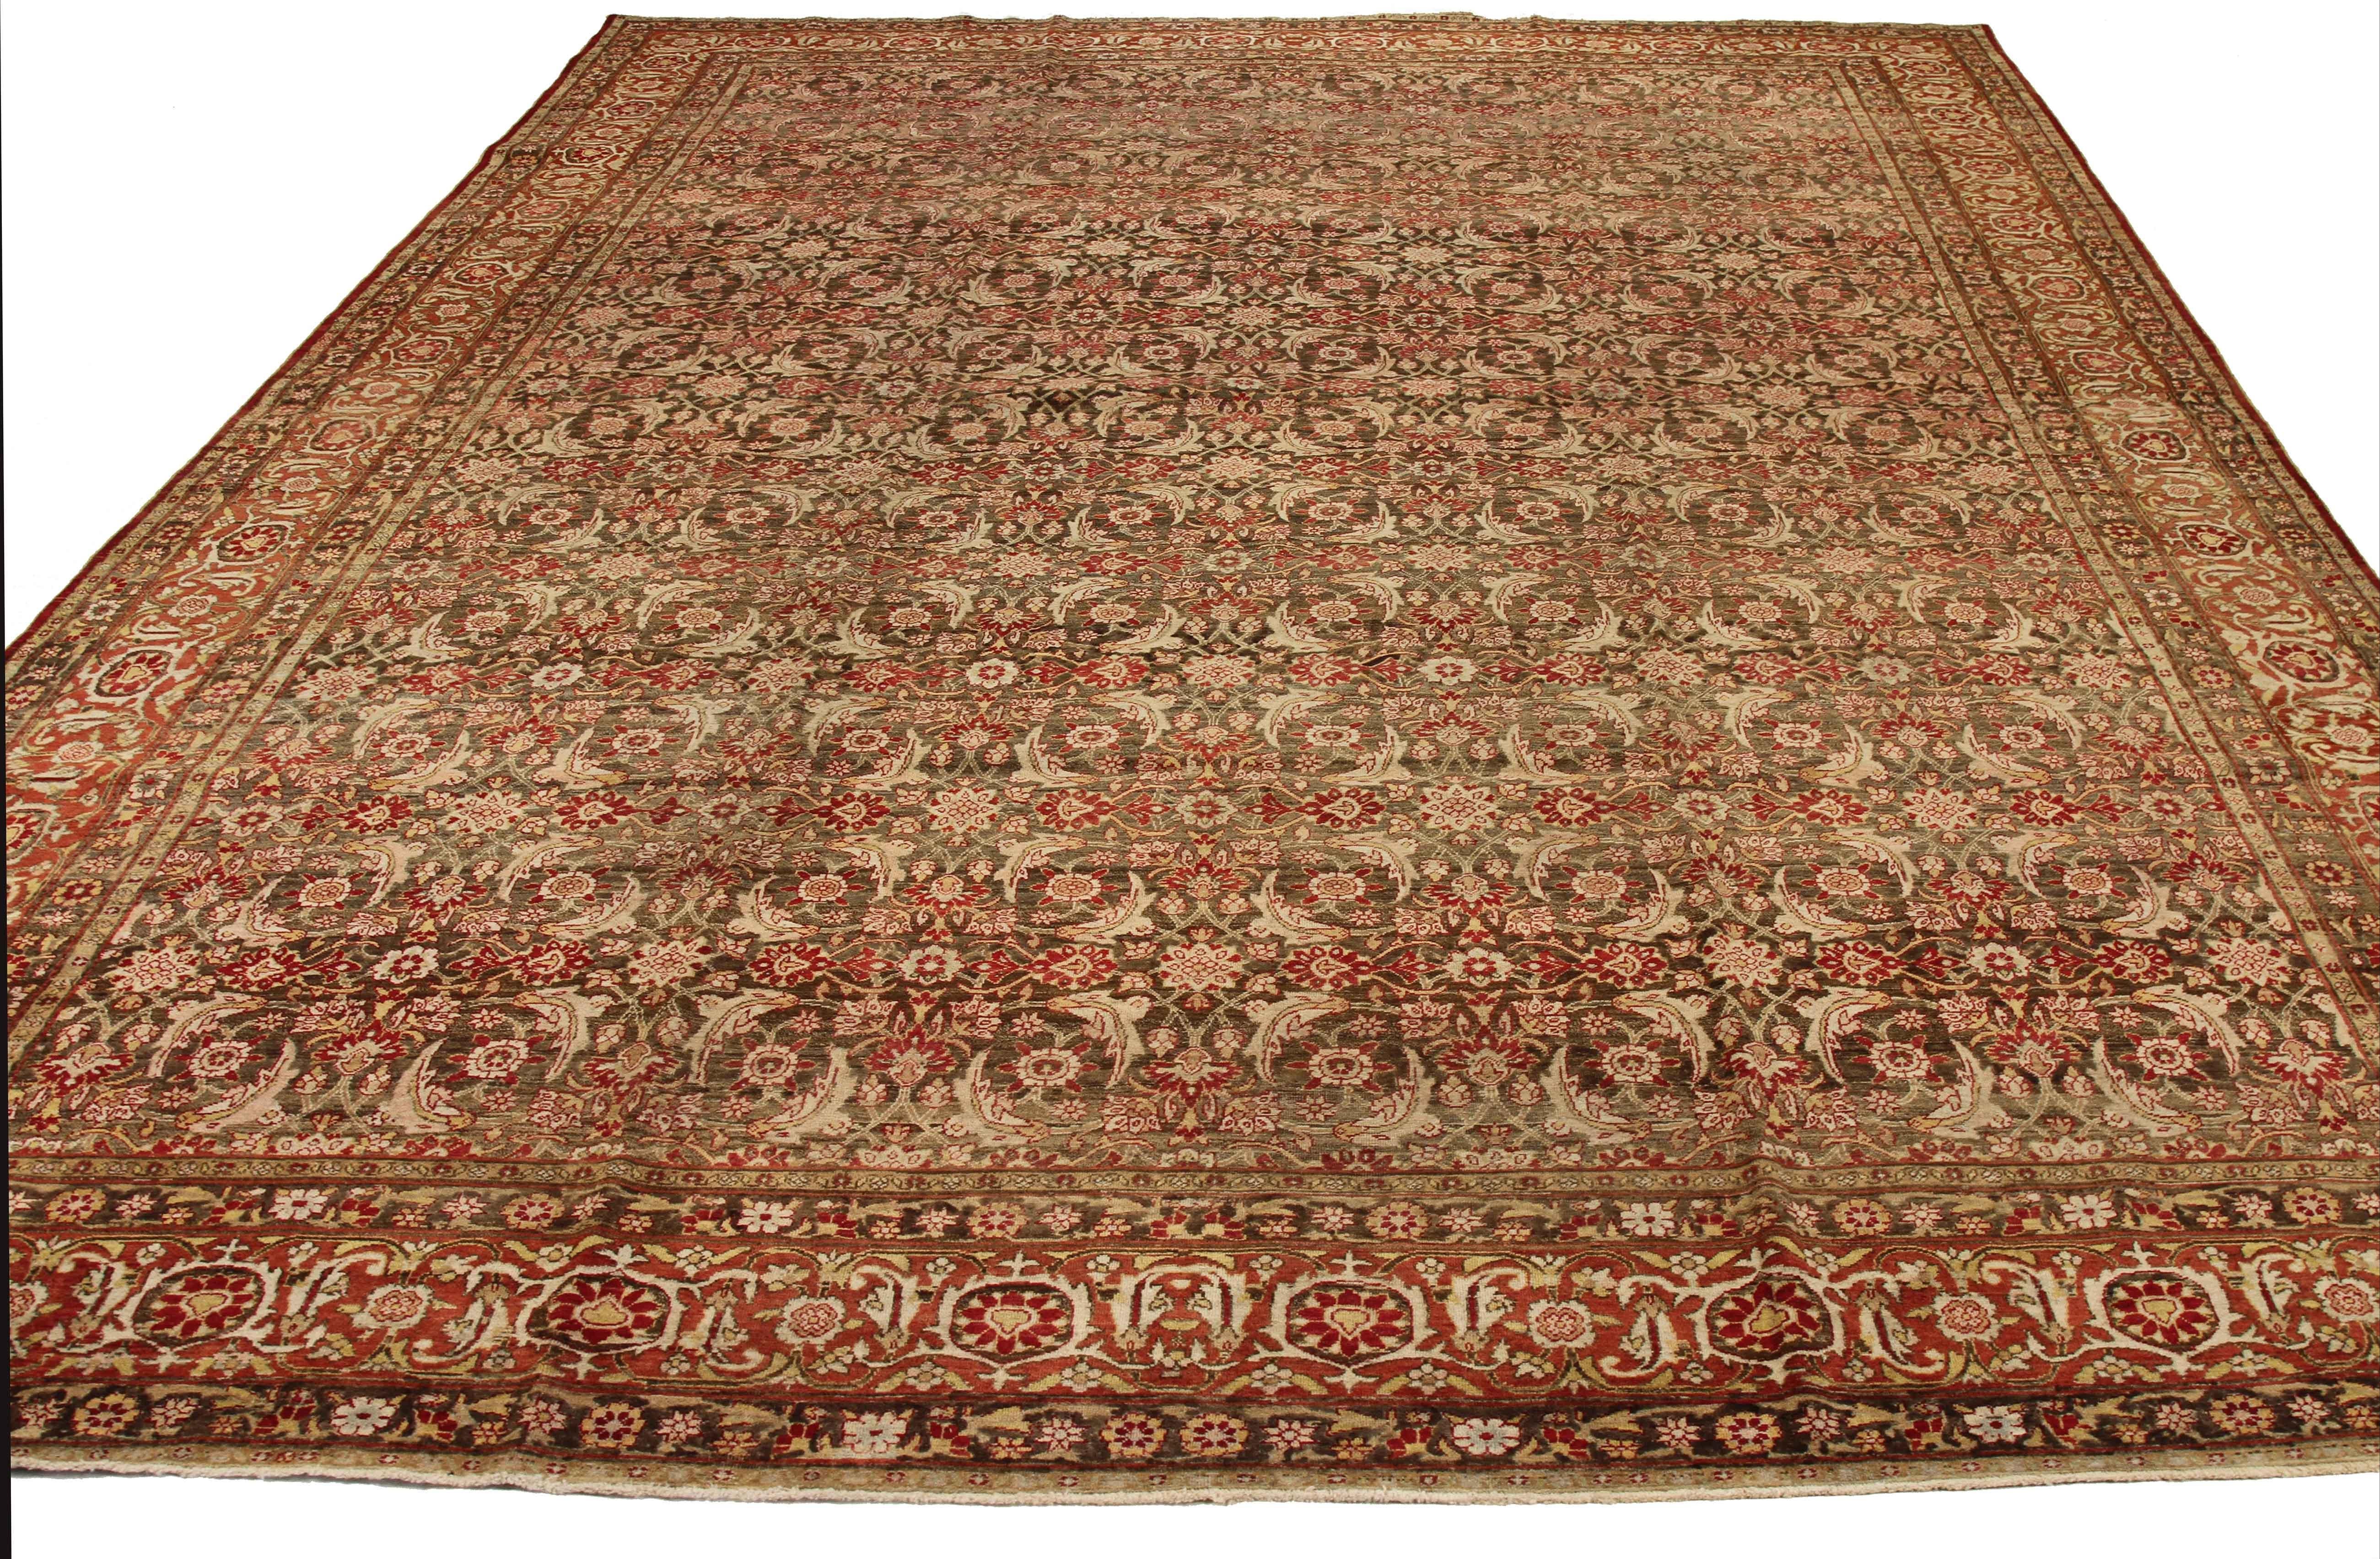  Antique Persian Rug Yazd Design with Red and Pink Medallion Field, circa 1910s In Excellent Condition For Sale In Dallas, TX